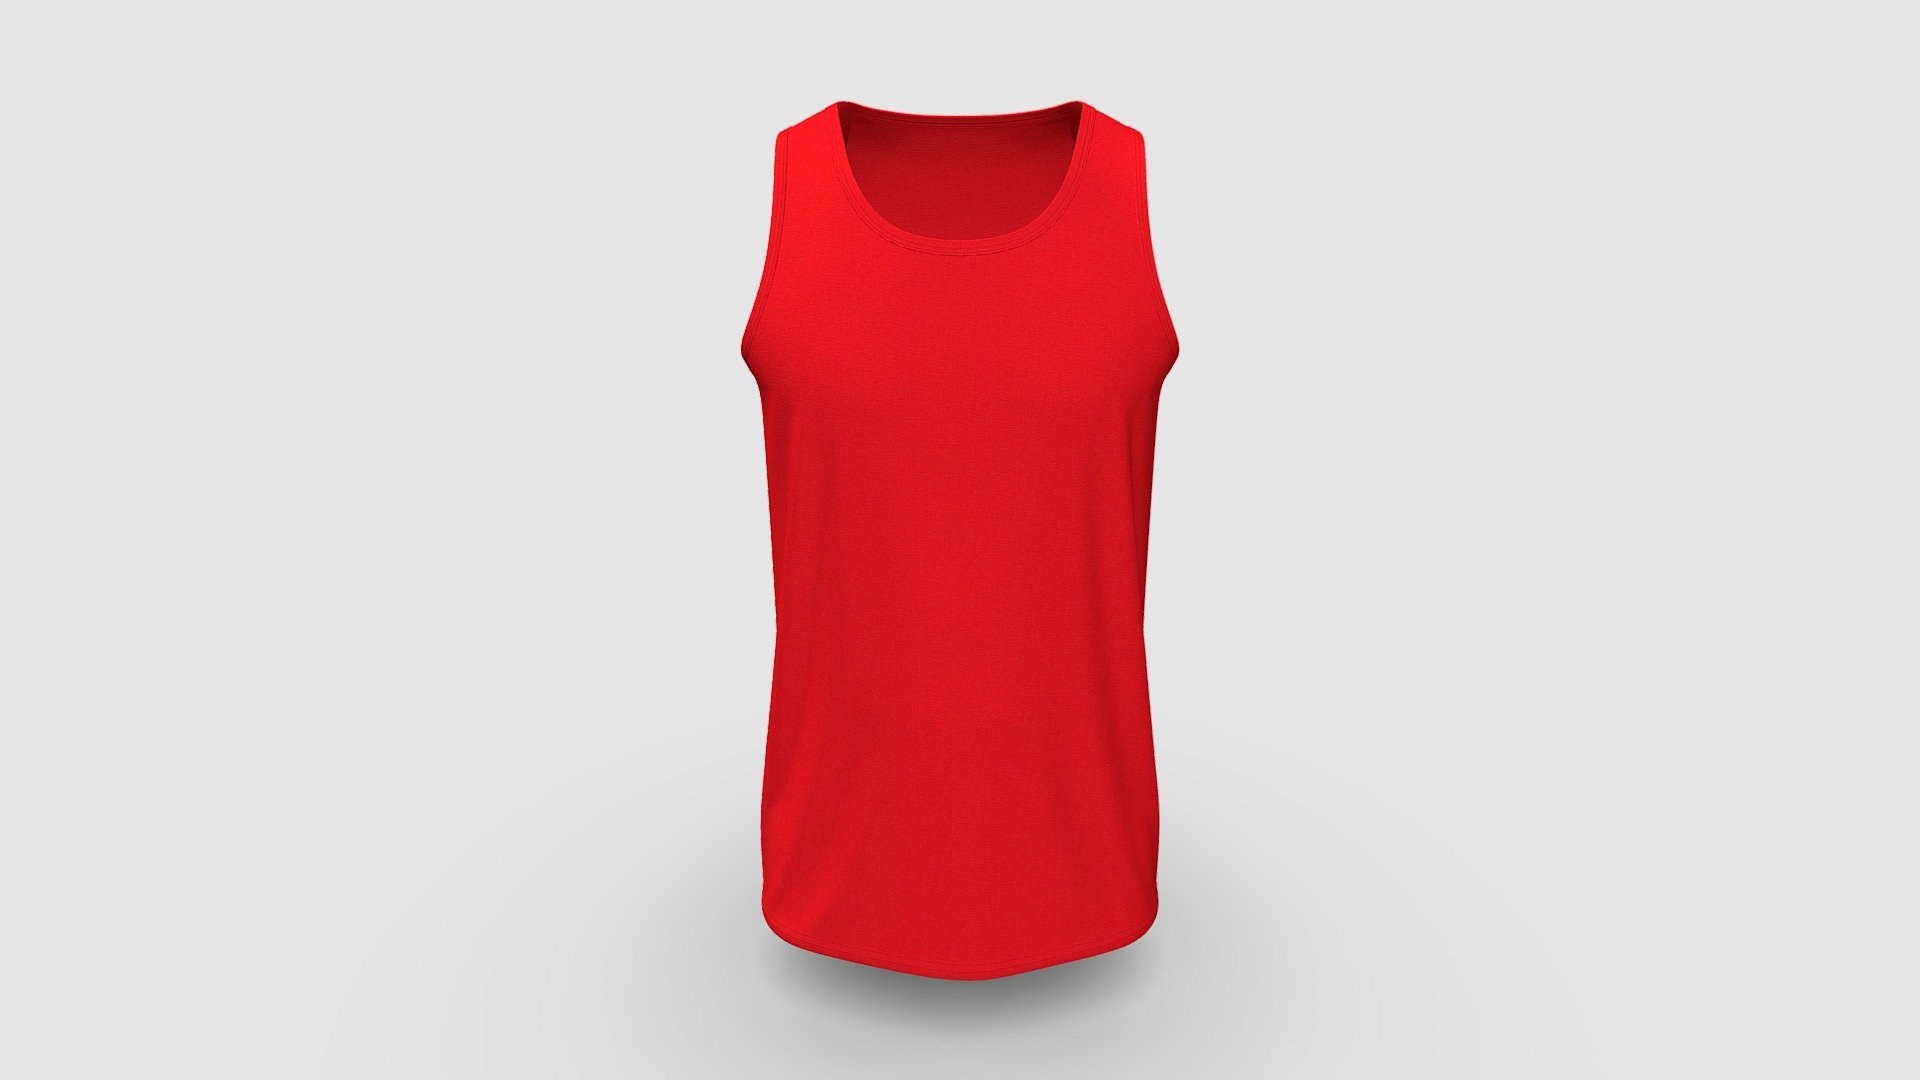 Cloth Title = Thick Strap Tank Tops 

SKU = DG100211 

Category = Unisex 

Product Type = Tank Top 

Cloth Length = Regular 

Body Fit = Fitted  

Occasion = Sportswear  


Our Services:

3D Apparel Design.

OBJ,FBX,GLTF Making with High/Low Poly.

Fabric Digitalization.

Mockup making.

3D Teck Pack.

Pattern Making.

2D Illustration.

Cloth Animation and 360 Spin Video.


Contact us:- 

Email: info@digitalfashionwear.com 

Website: https://digitalfashionwear.com 


We designed all the types of cloth specially focused on product visualization, e-commerce, fitting, and production. 

We will design: 

T-shirts 

Polo shirts 

Hoodies 

Sweatshirt 

Jackets 

Shirts 

TankTops 

Trousers 

Bras 

Underwear 

Blazer 

Aprons 

Leggings 

and All Fashion items. 





Our goal is to make sure what we provide you, meets your demand 3d model